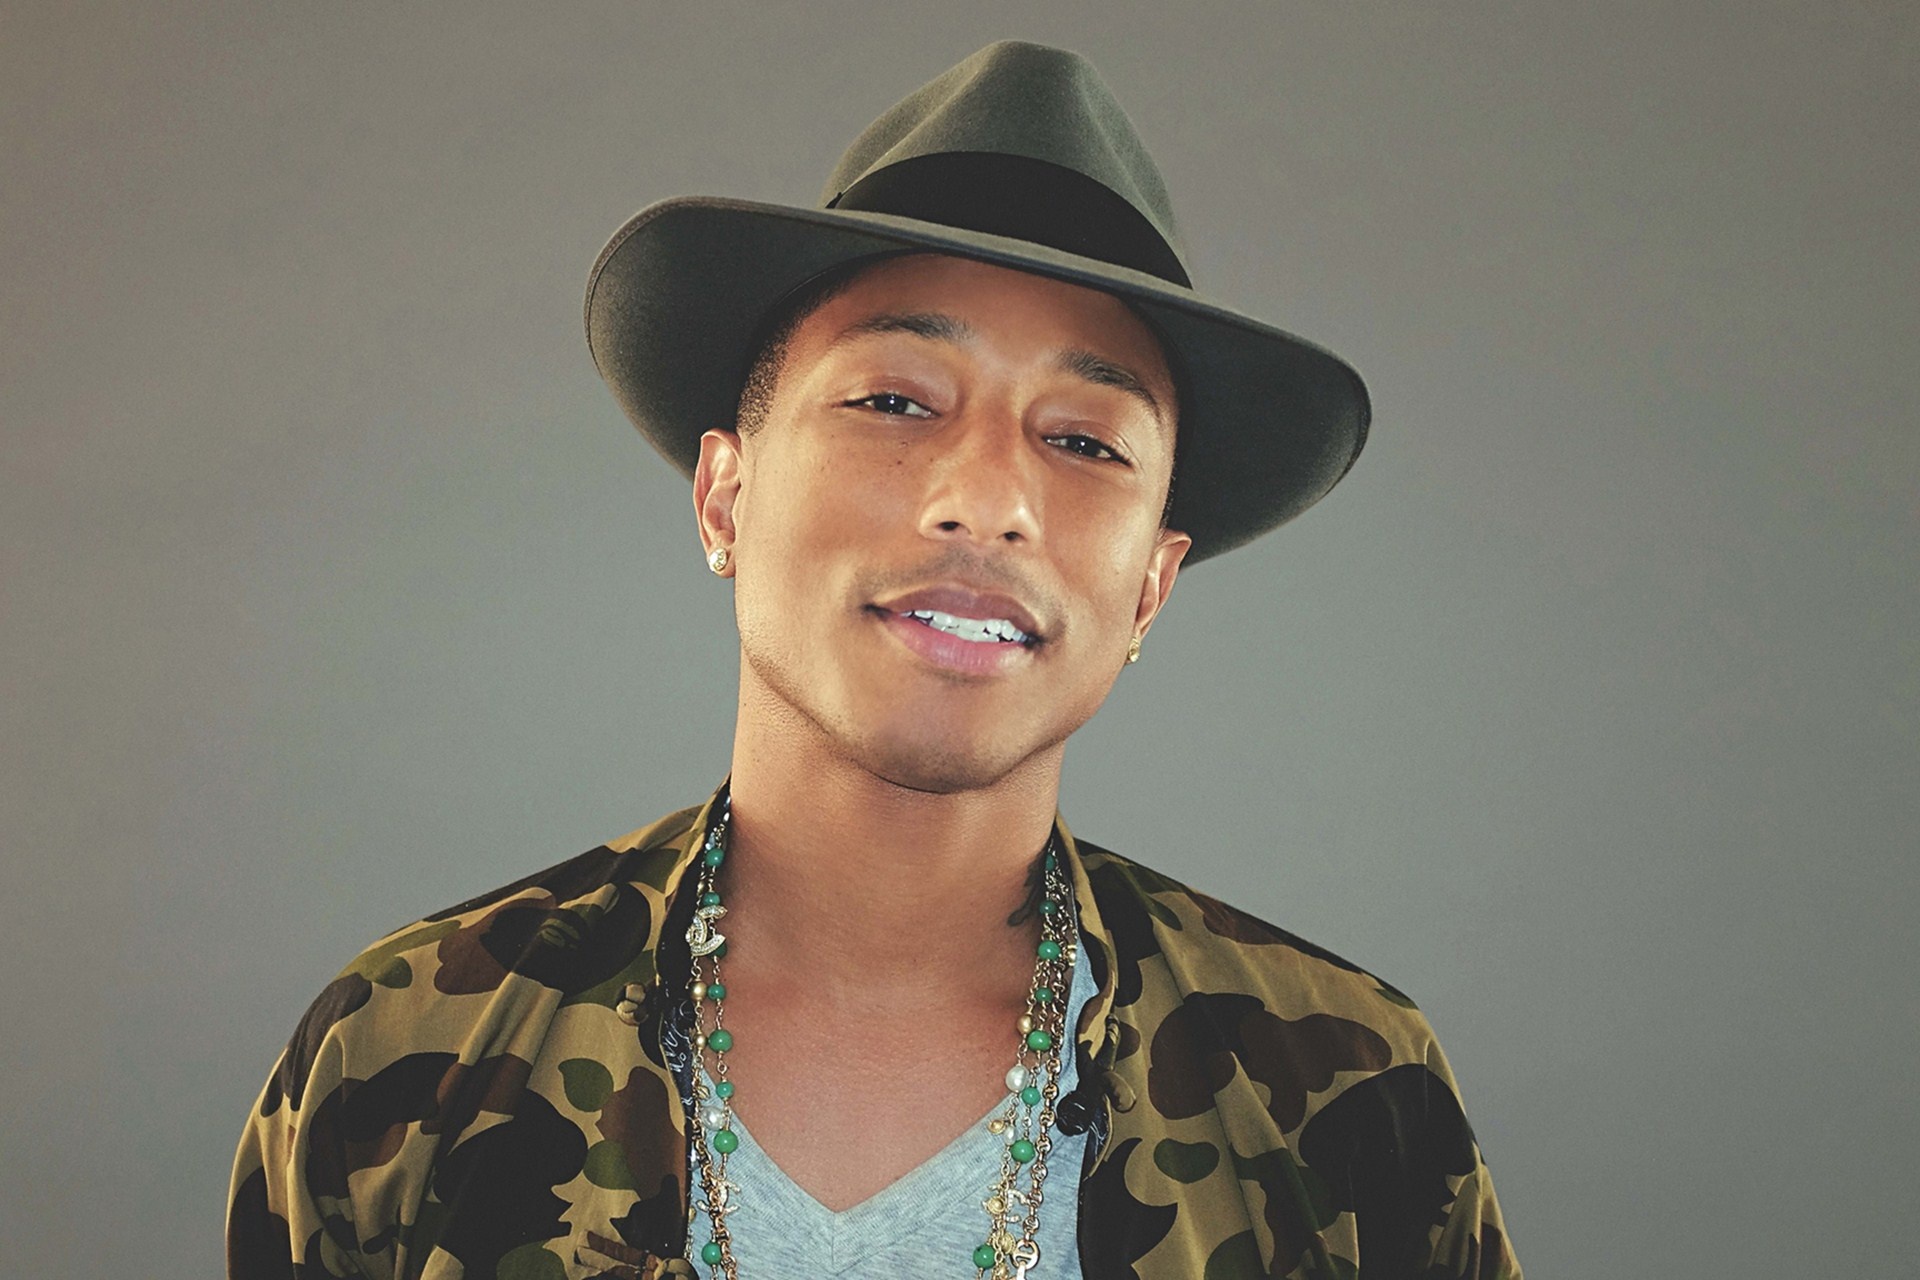 Pharrell Williams, Music wallpapers, HQ pictures, 1920x1280 HD Desktop